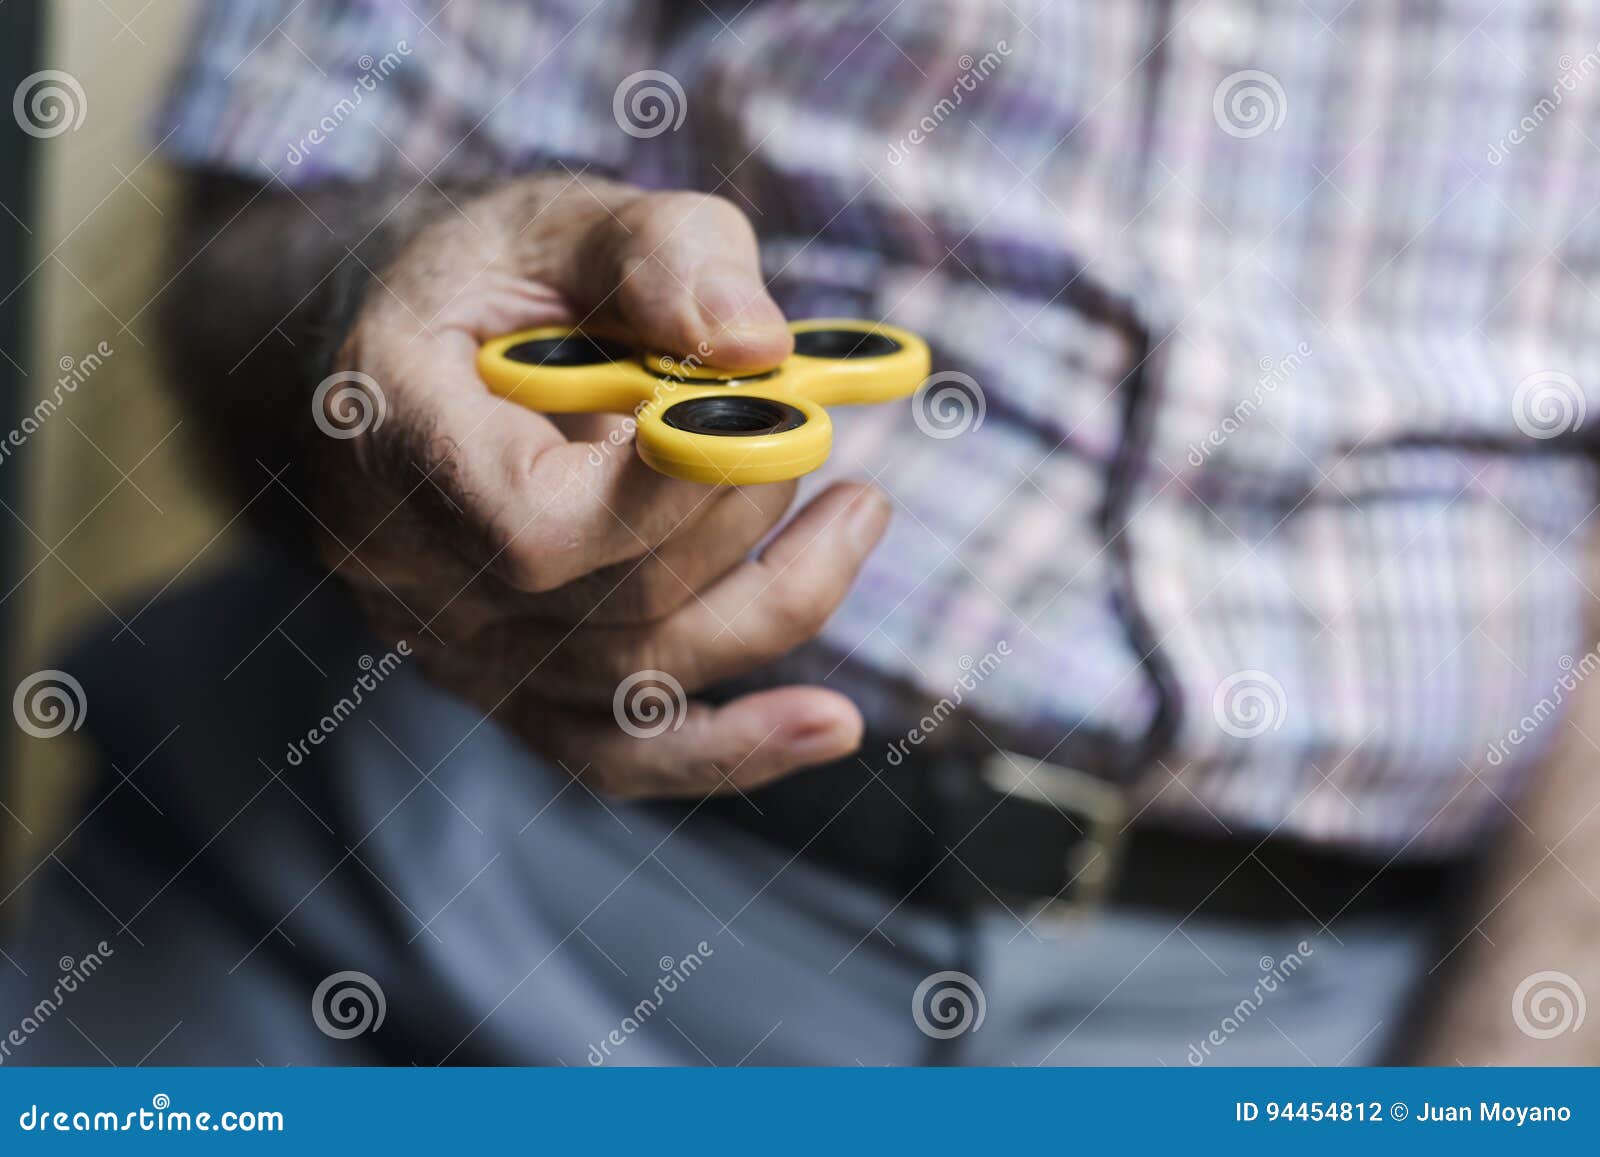 old man playing with a fidget spinner